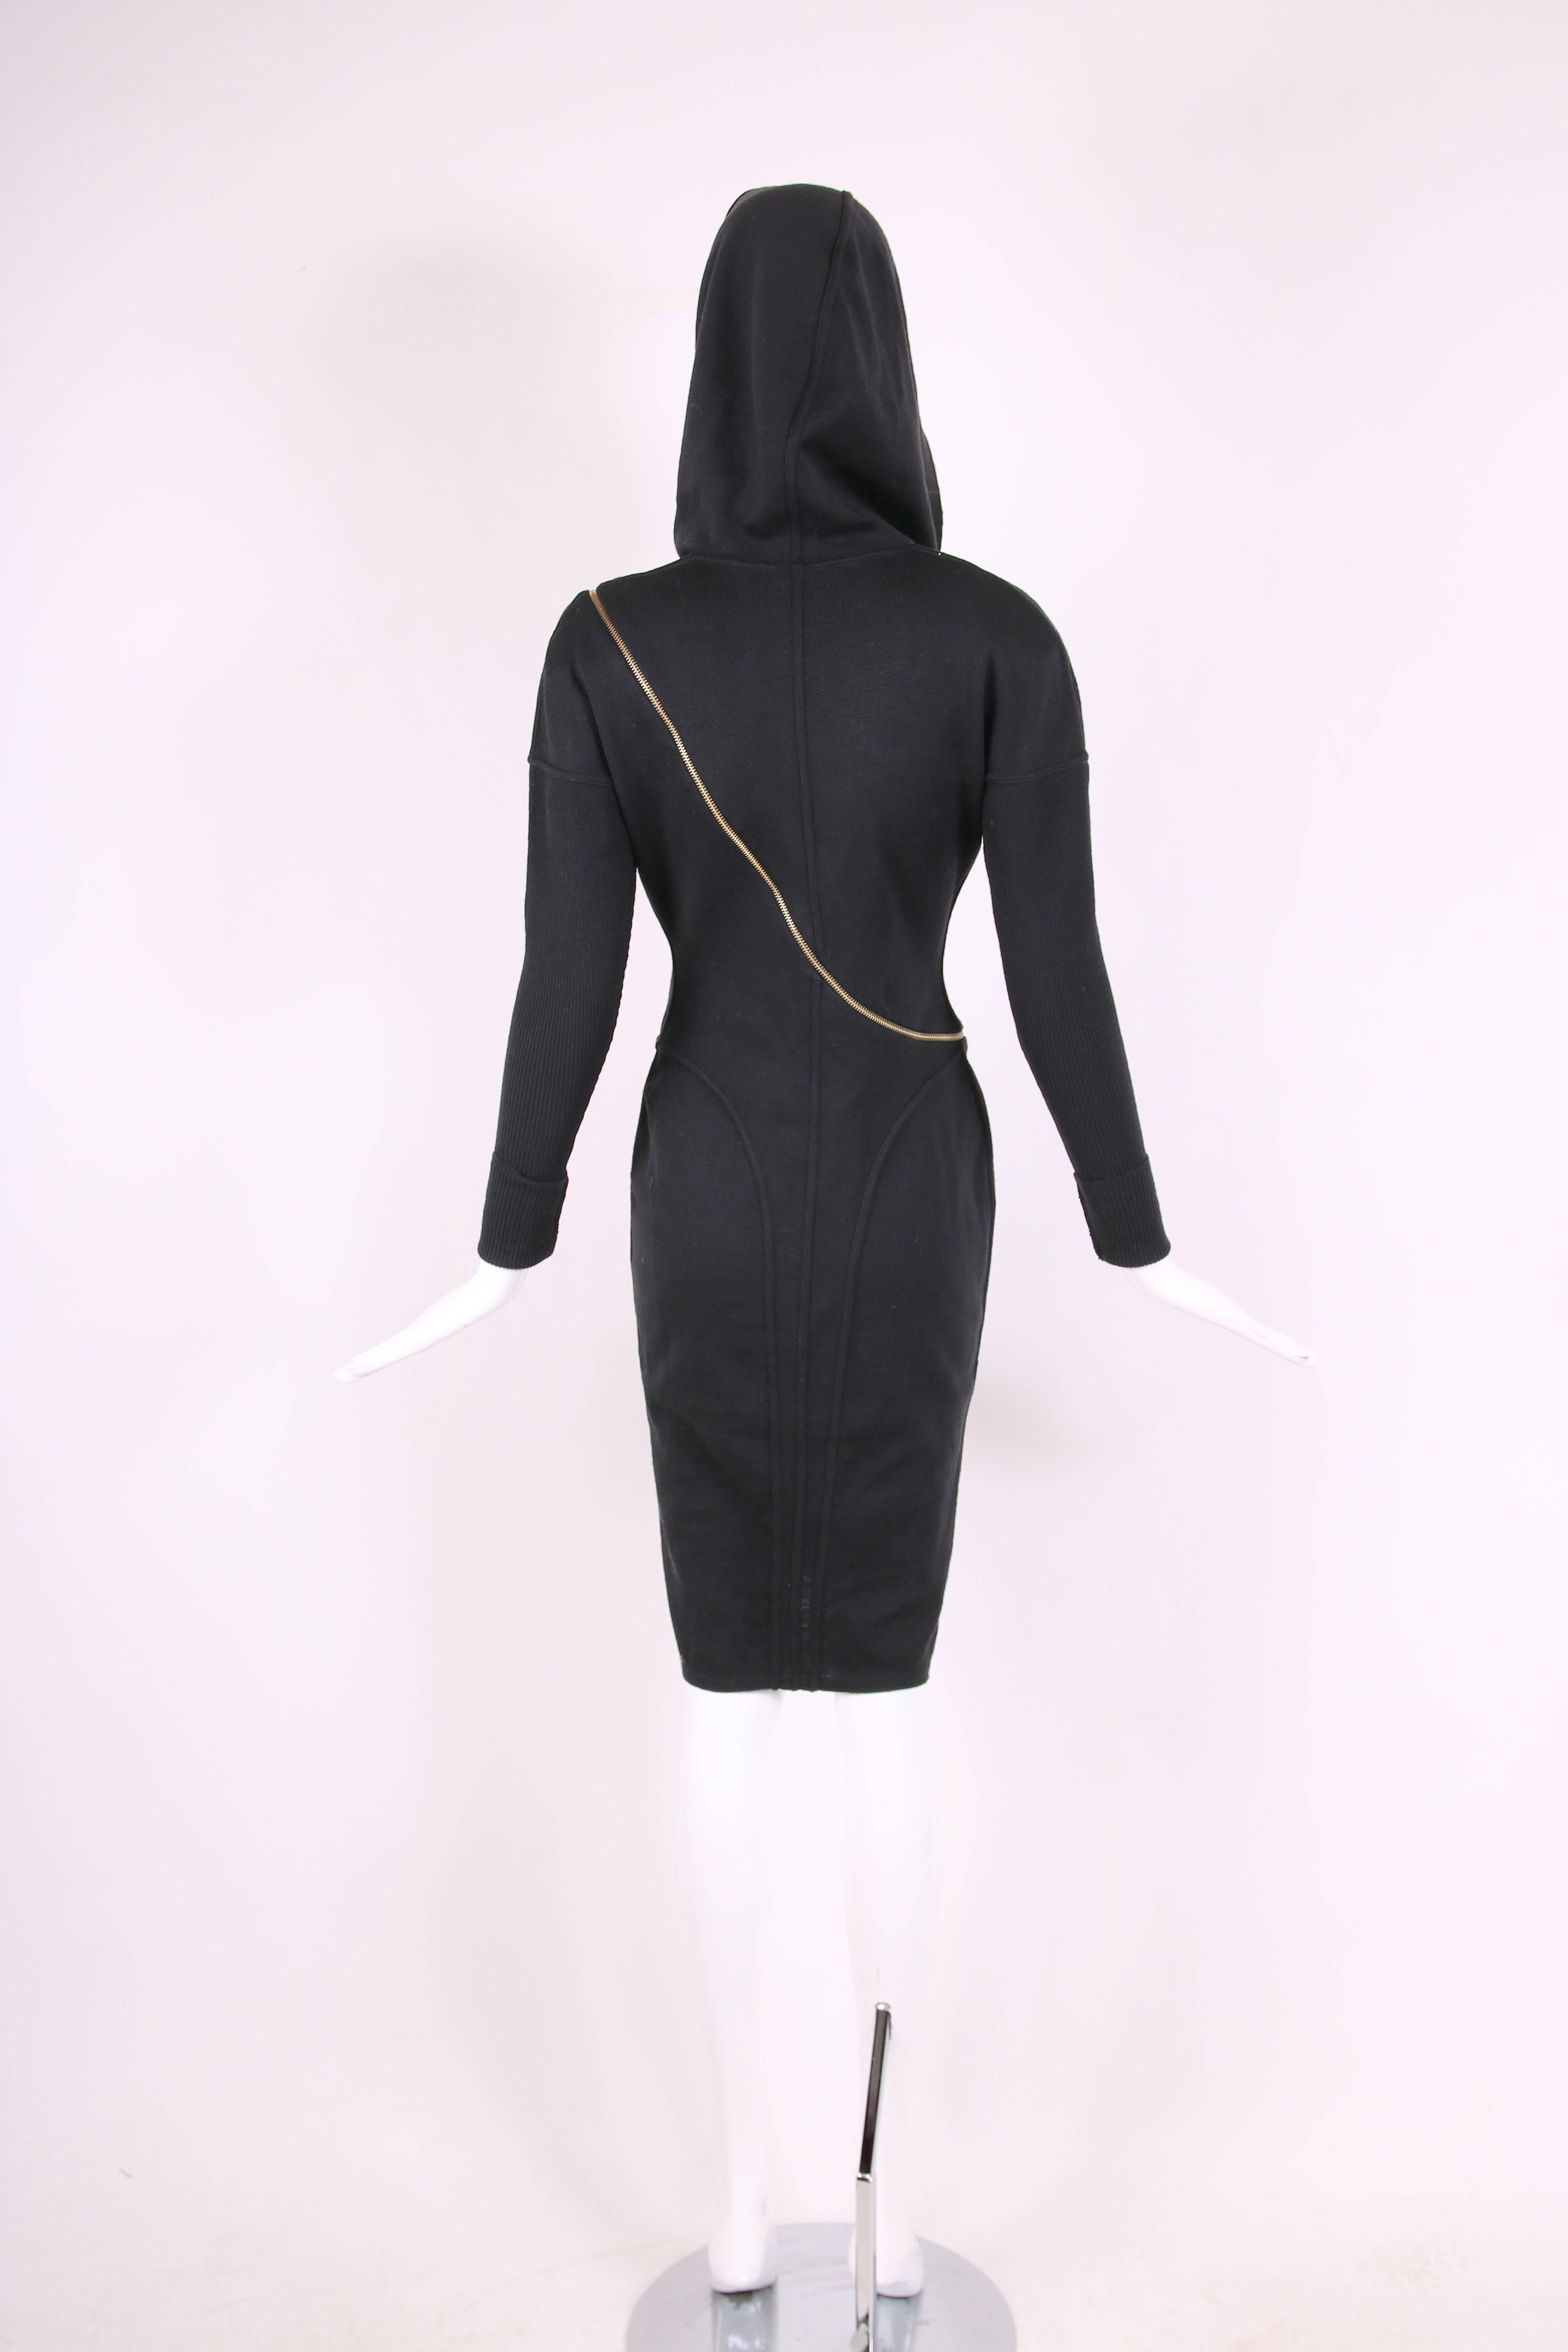 Alaia Museum Quality Black Hooded And Zippered Bodycon Dress, 1986 In Excellent Condition In Studio City, CA